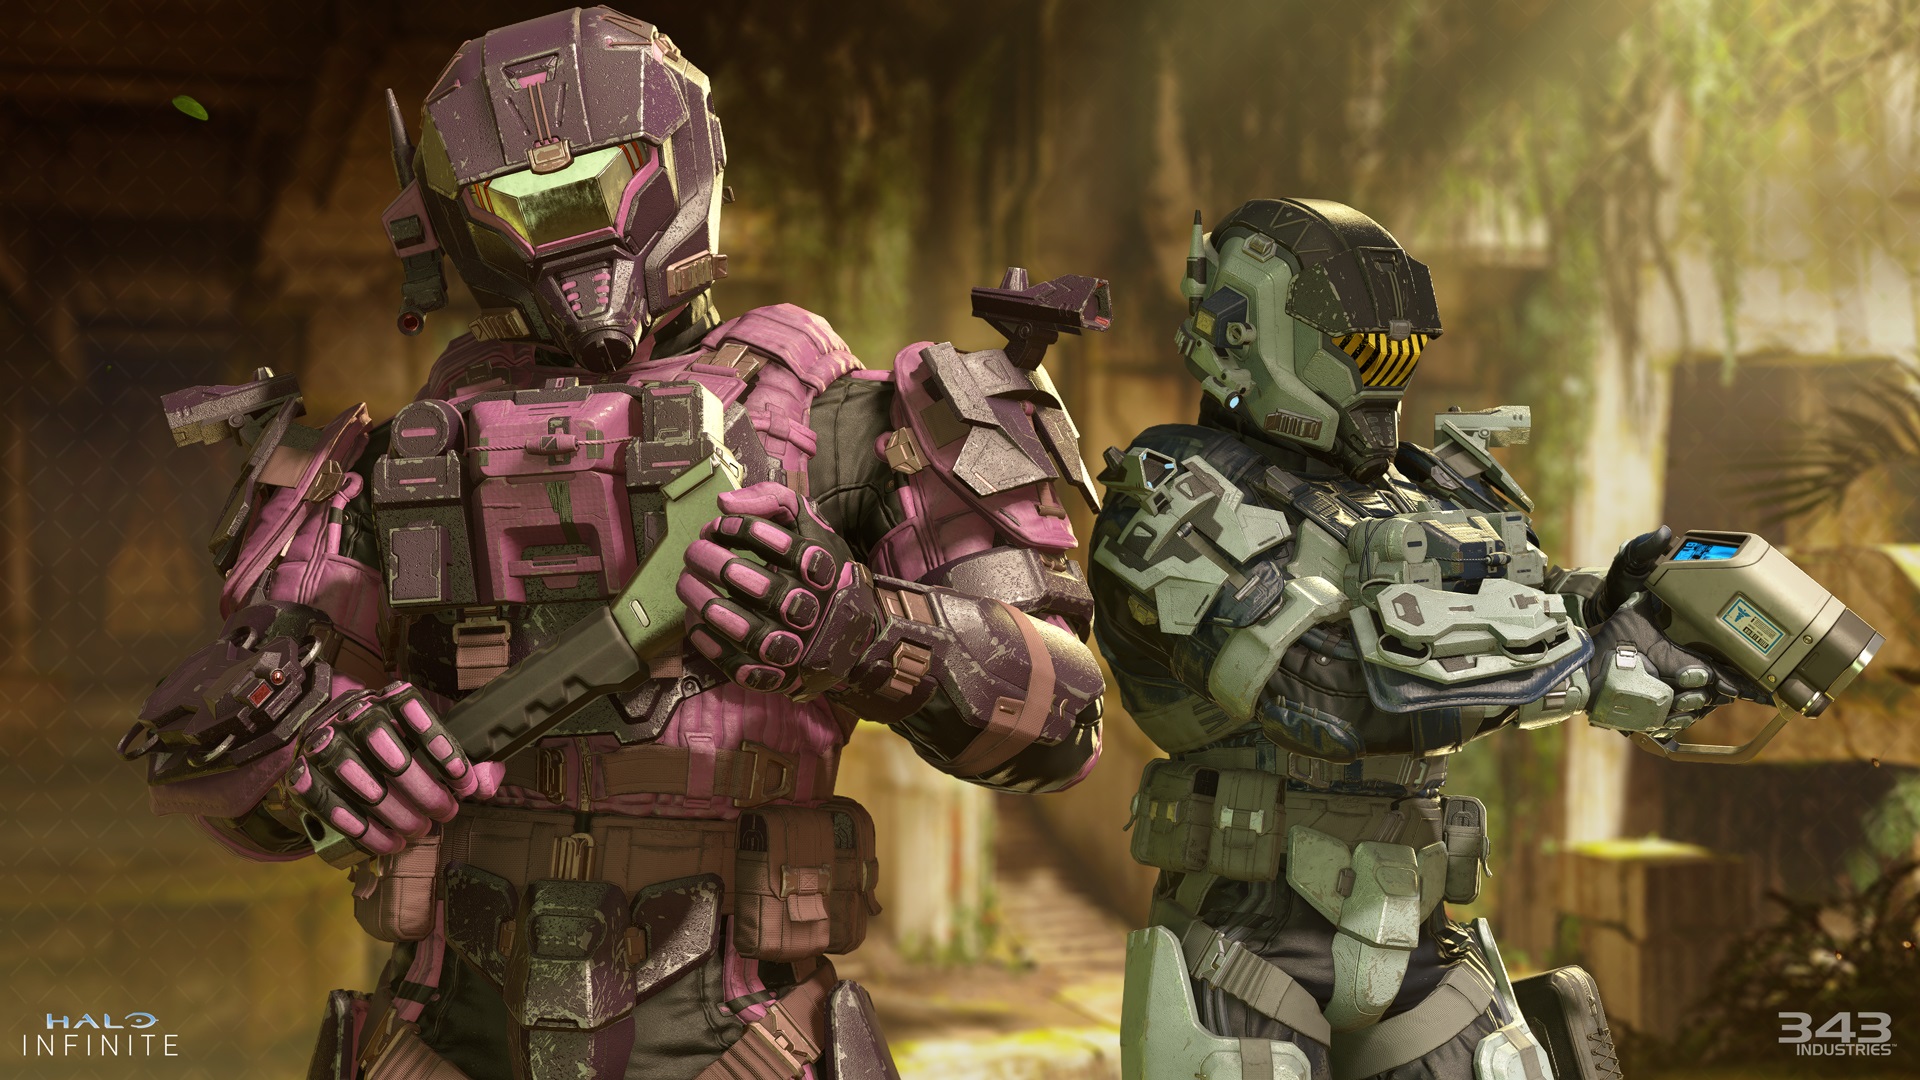 Combined Arms Operation press kit image showing two Spartans clad in Operation-themed armor